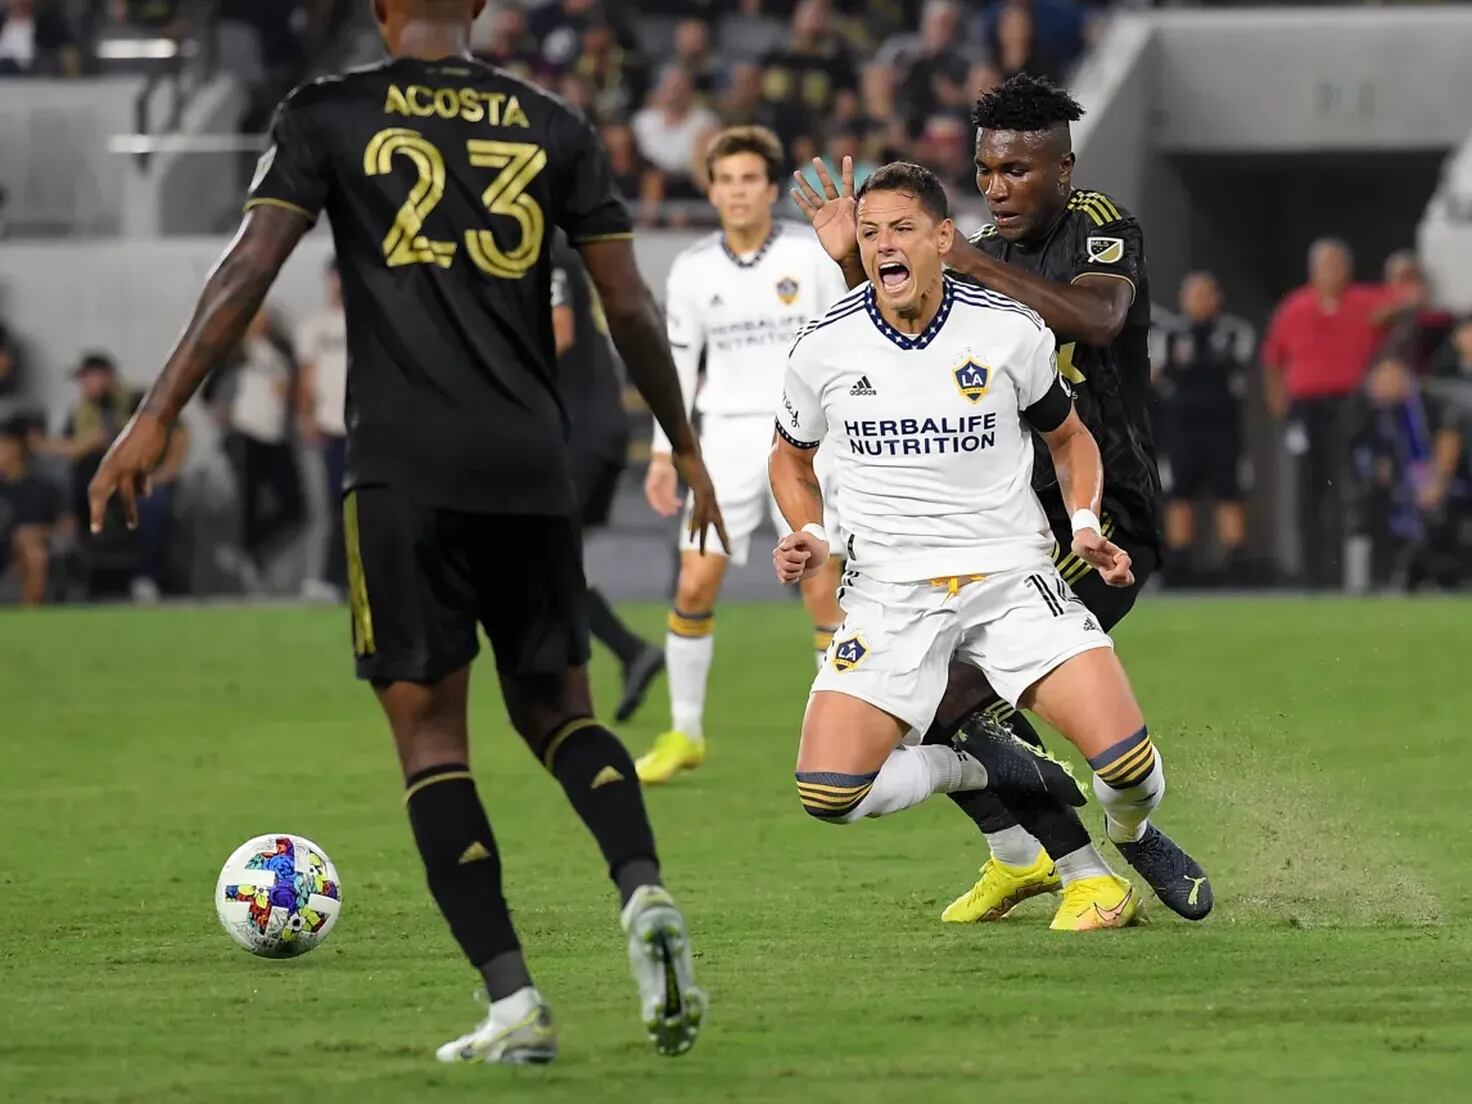 LA vs LAFC will kickoff their 2023 seasons in a match at the Rose Bowl